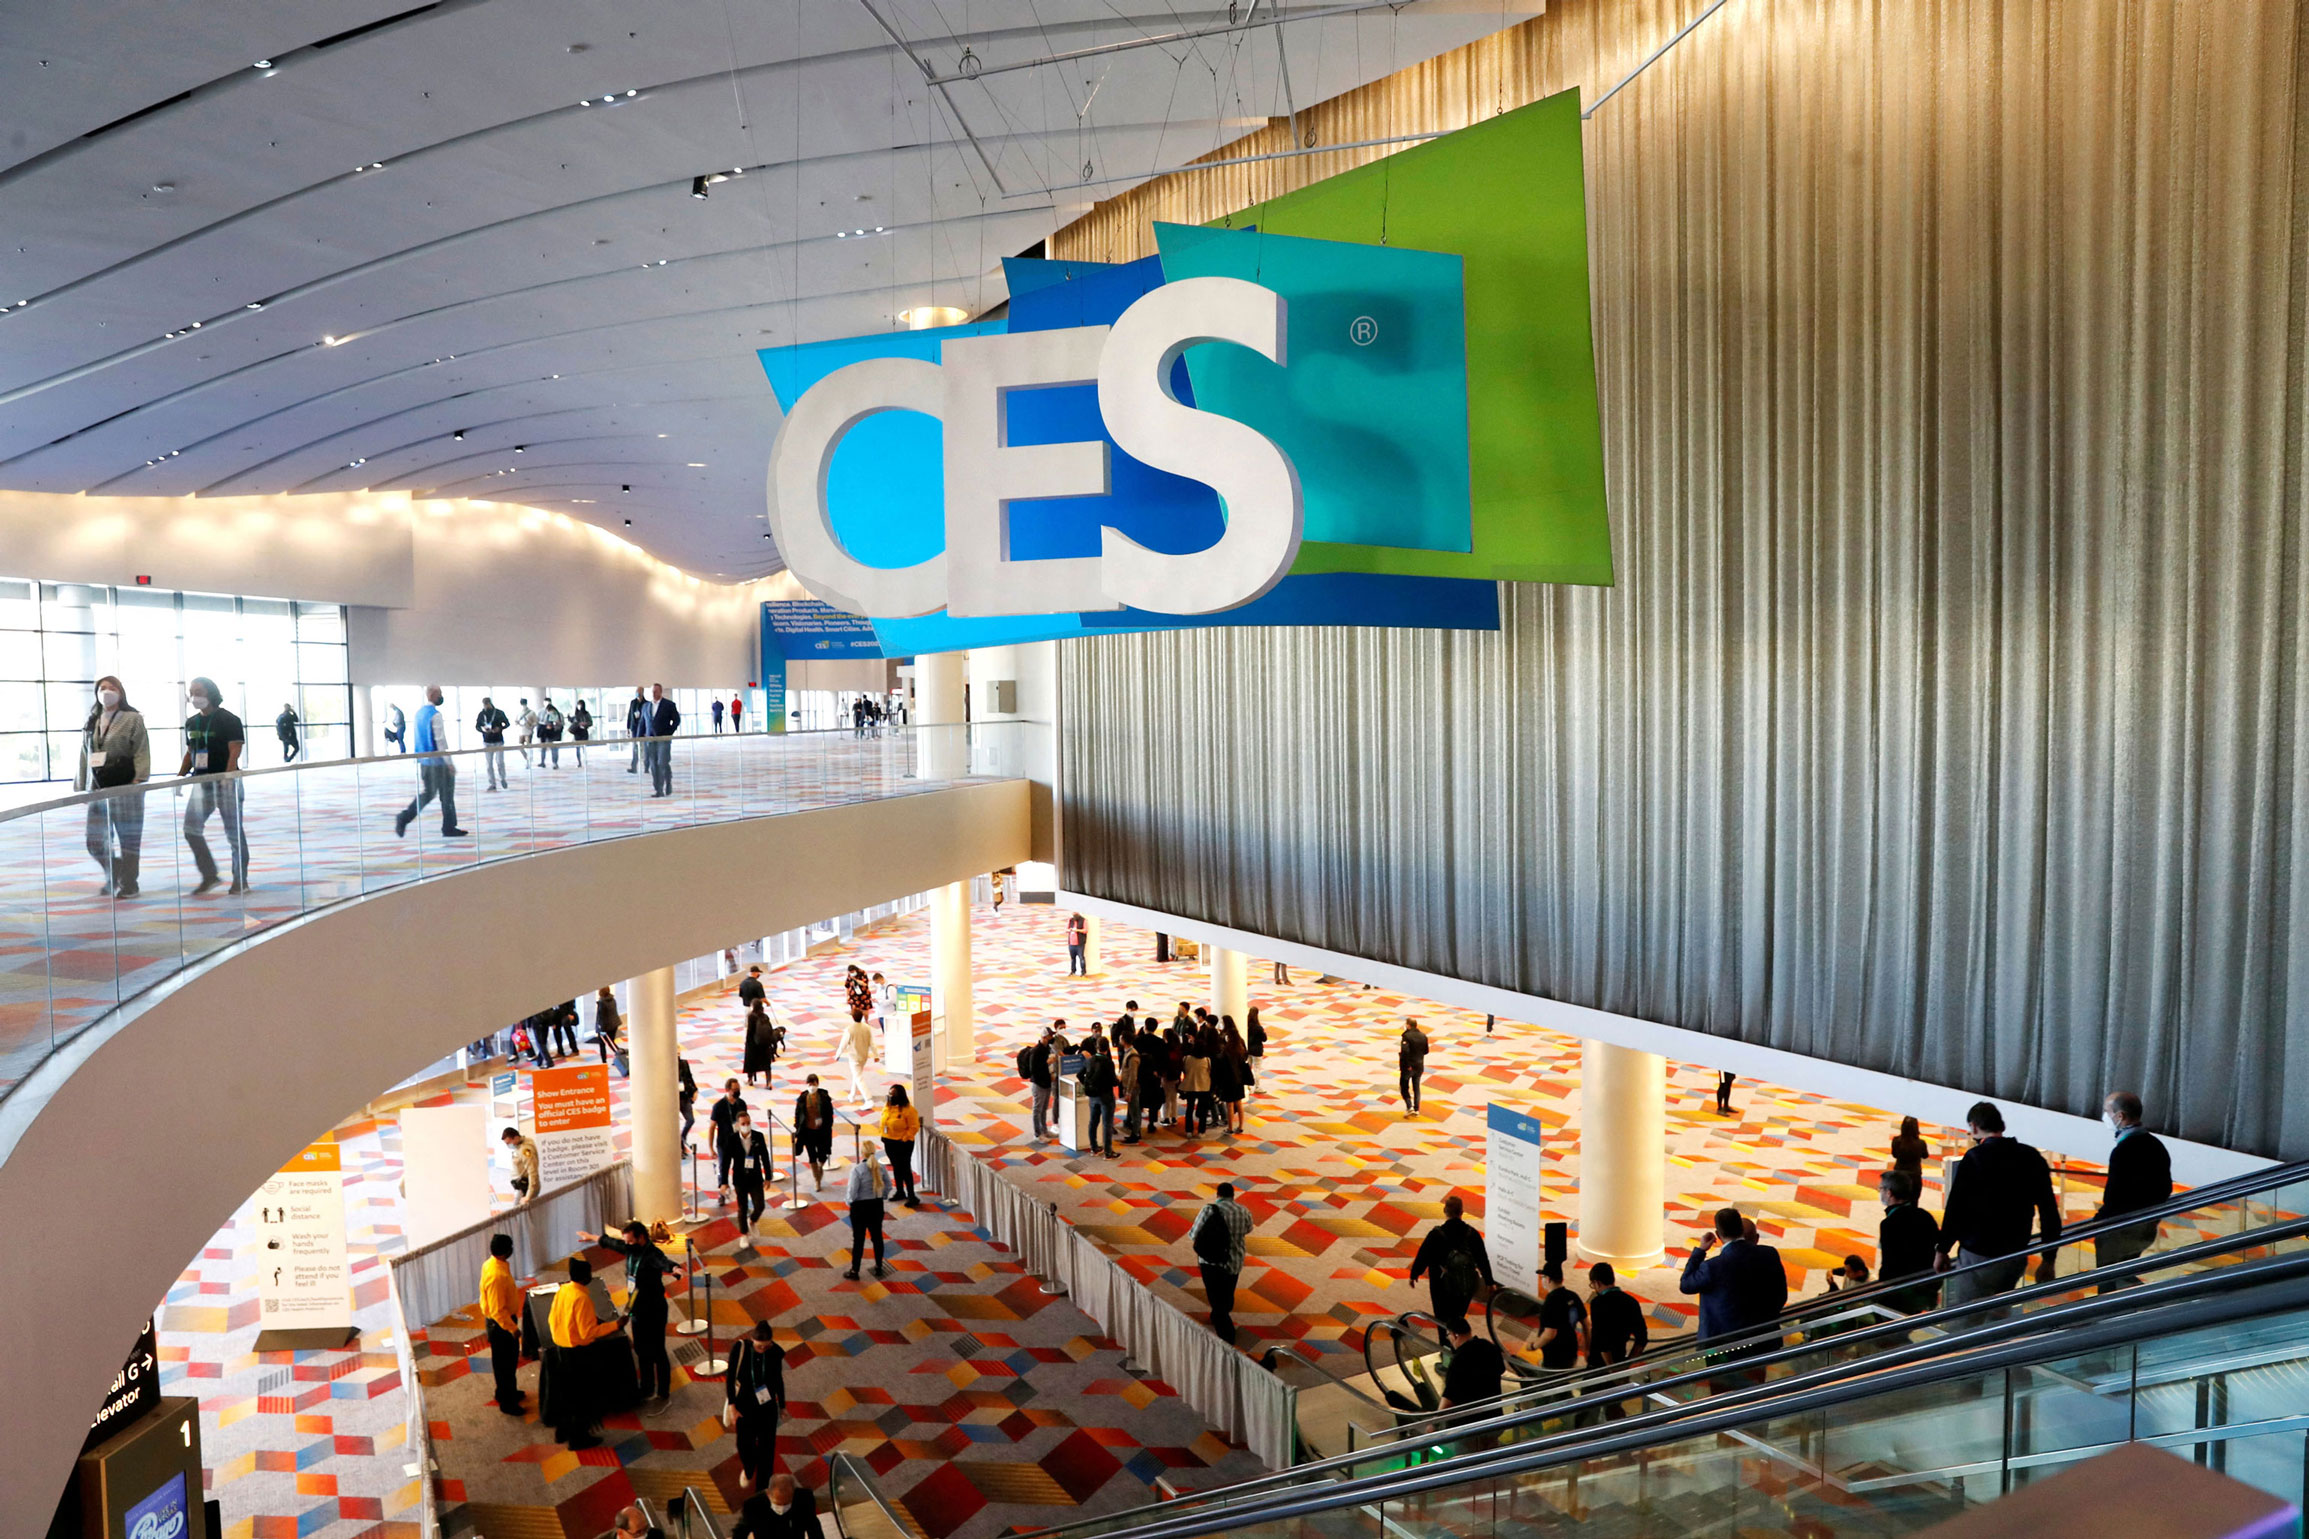 Attendees walk around the entrance of CES 2022 in Las Vegas on January 6.